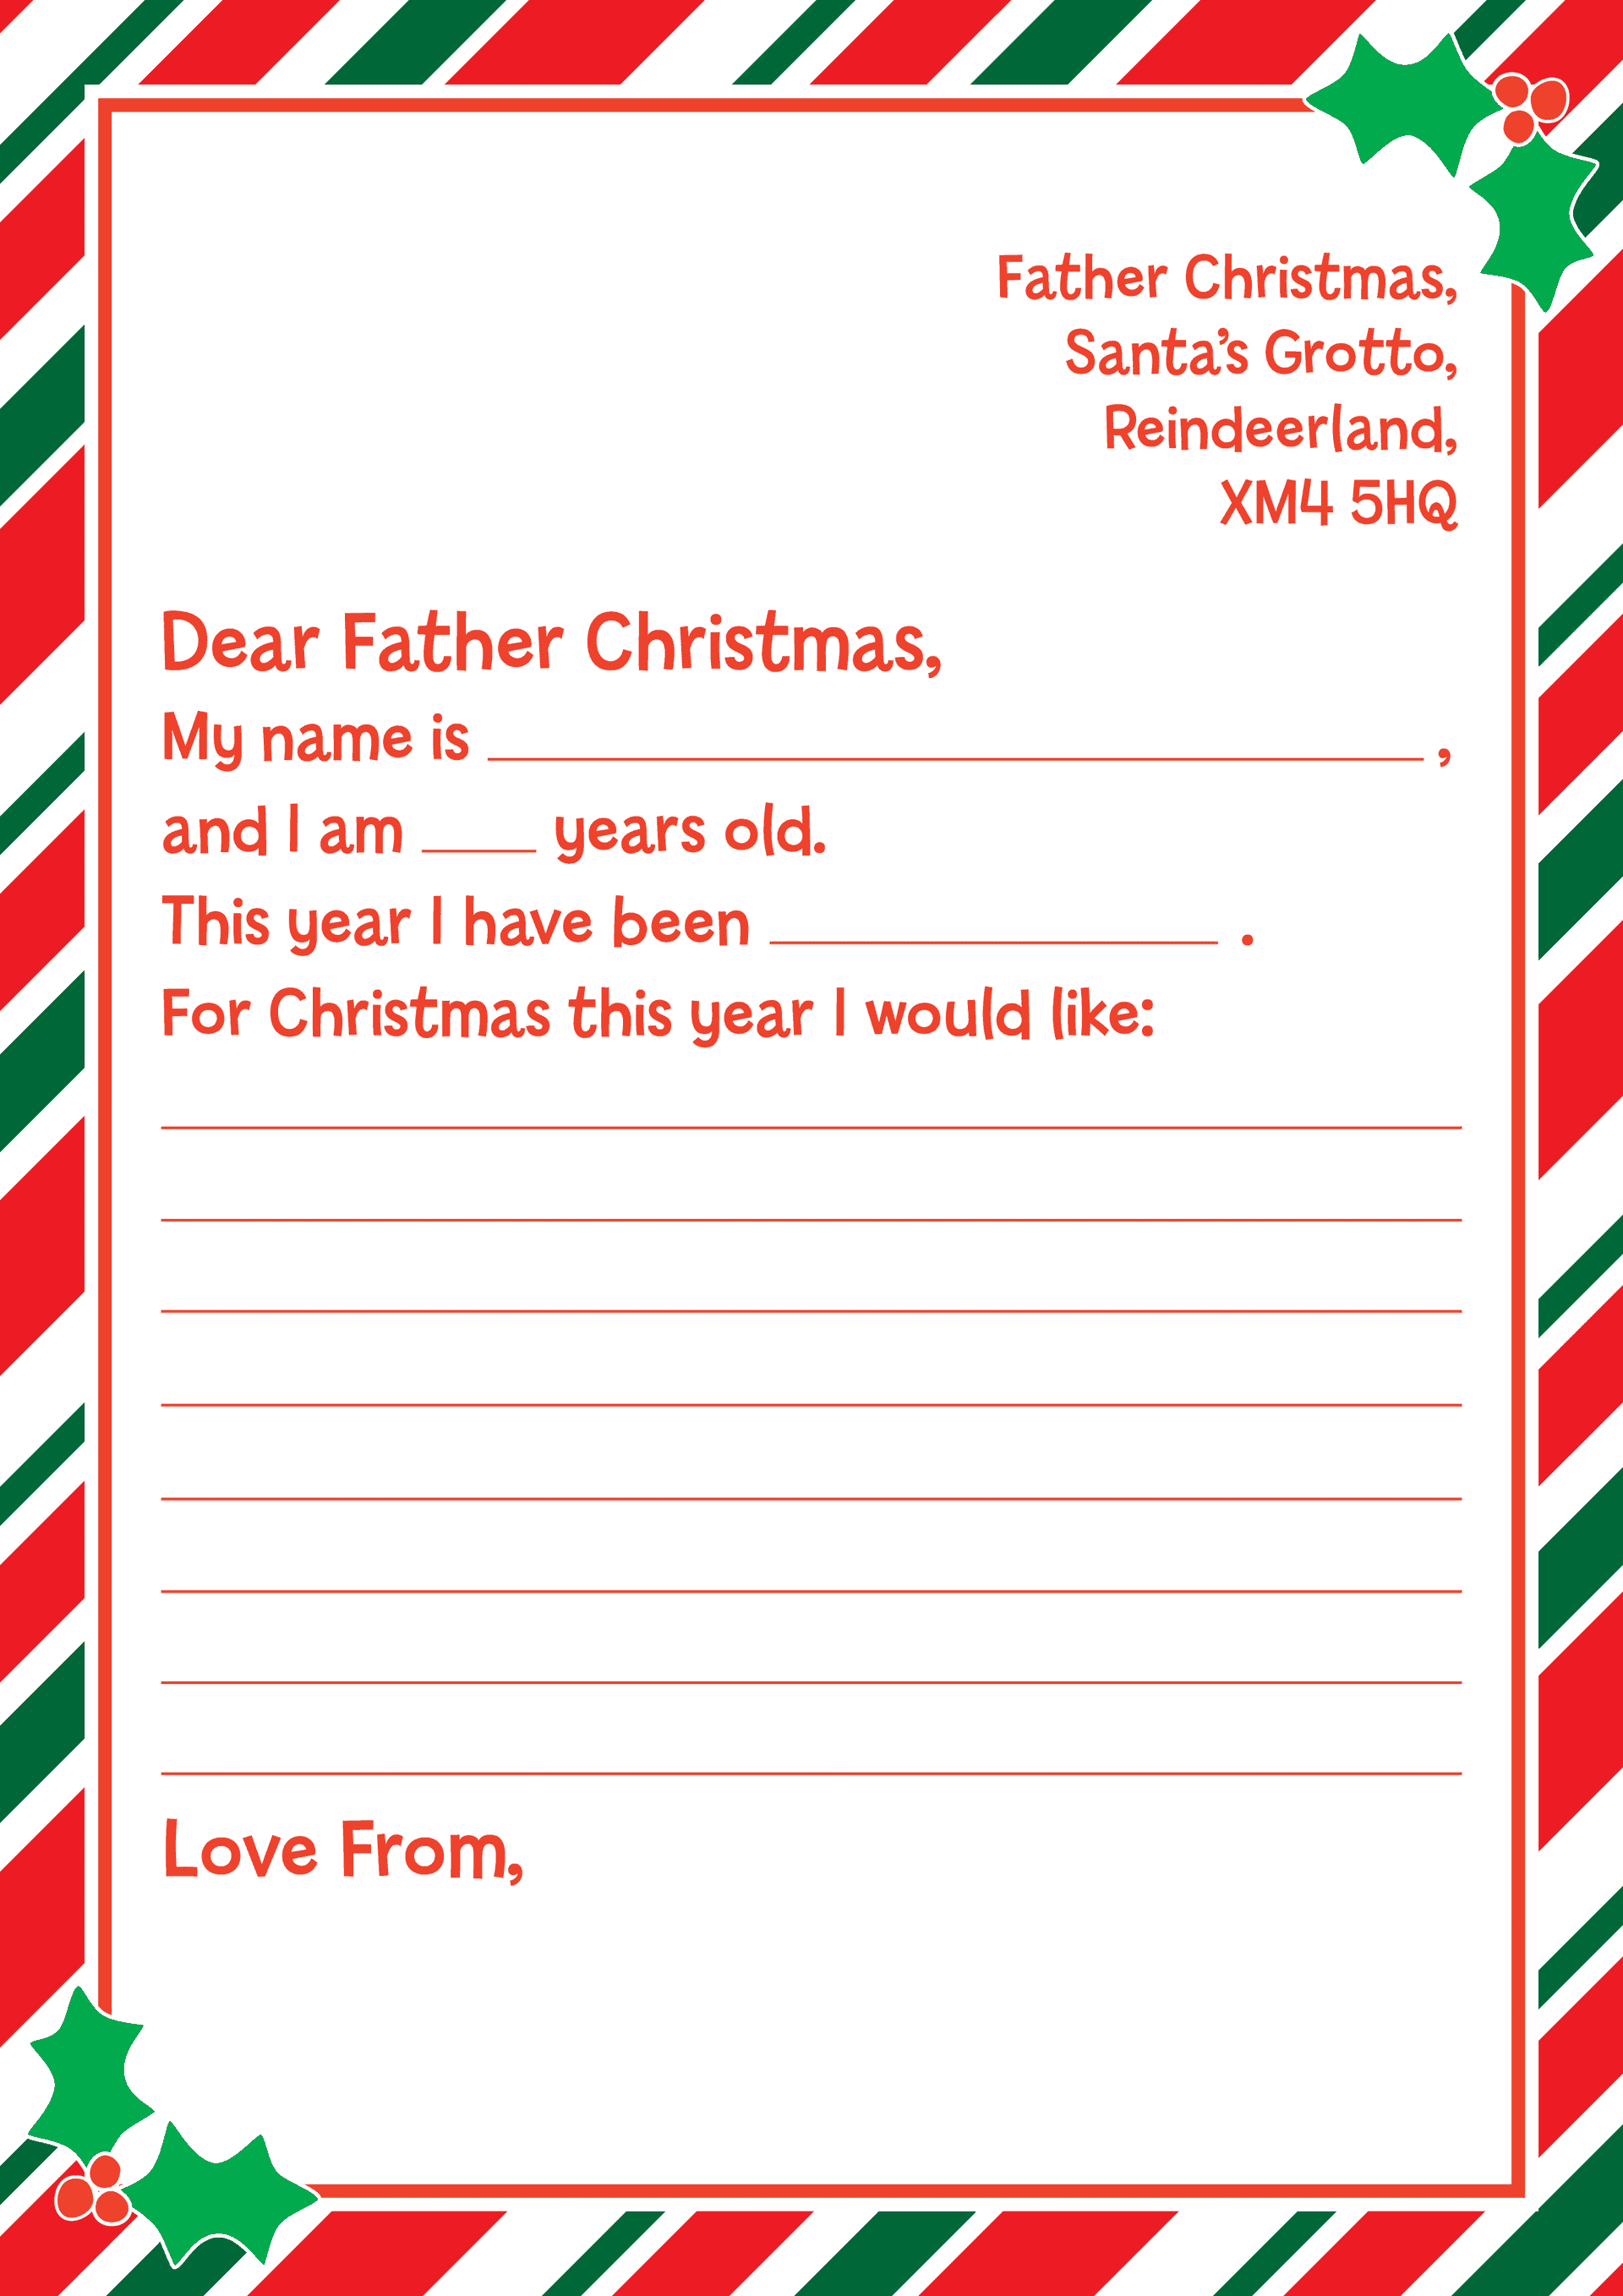 father-christmas-letter-template-pawprint-family